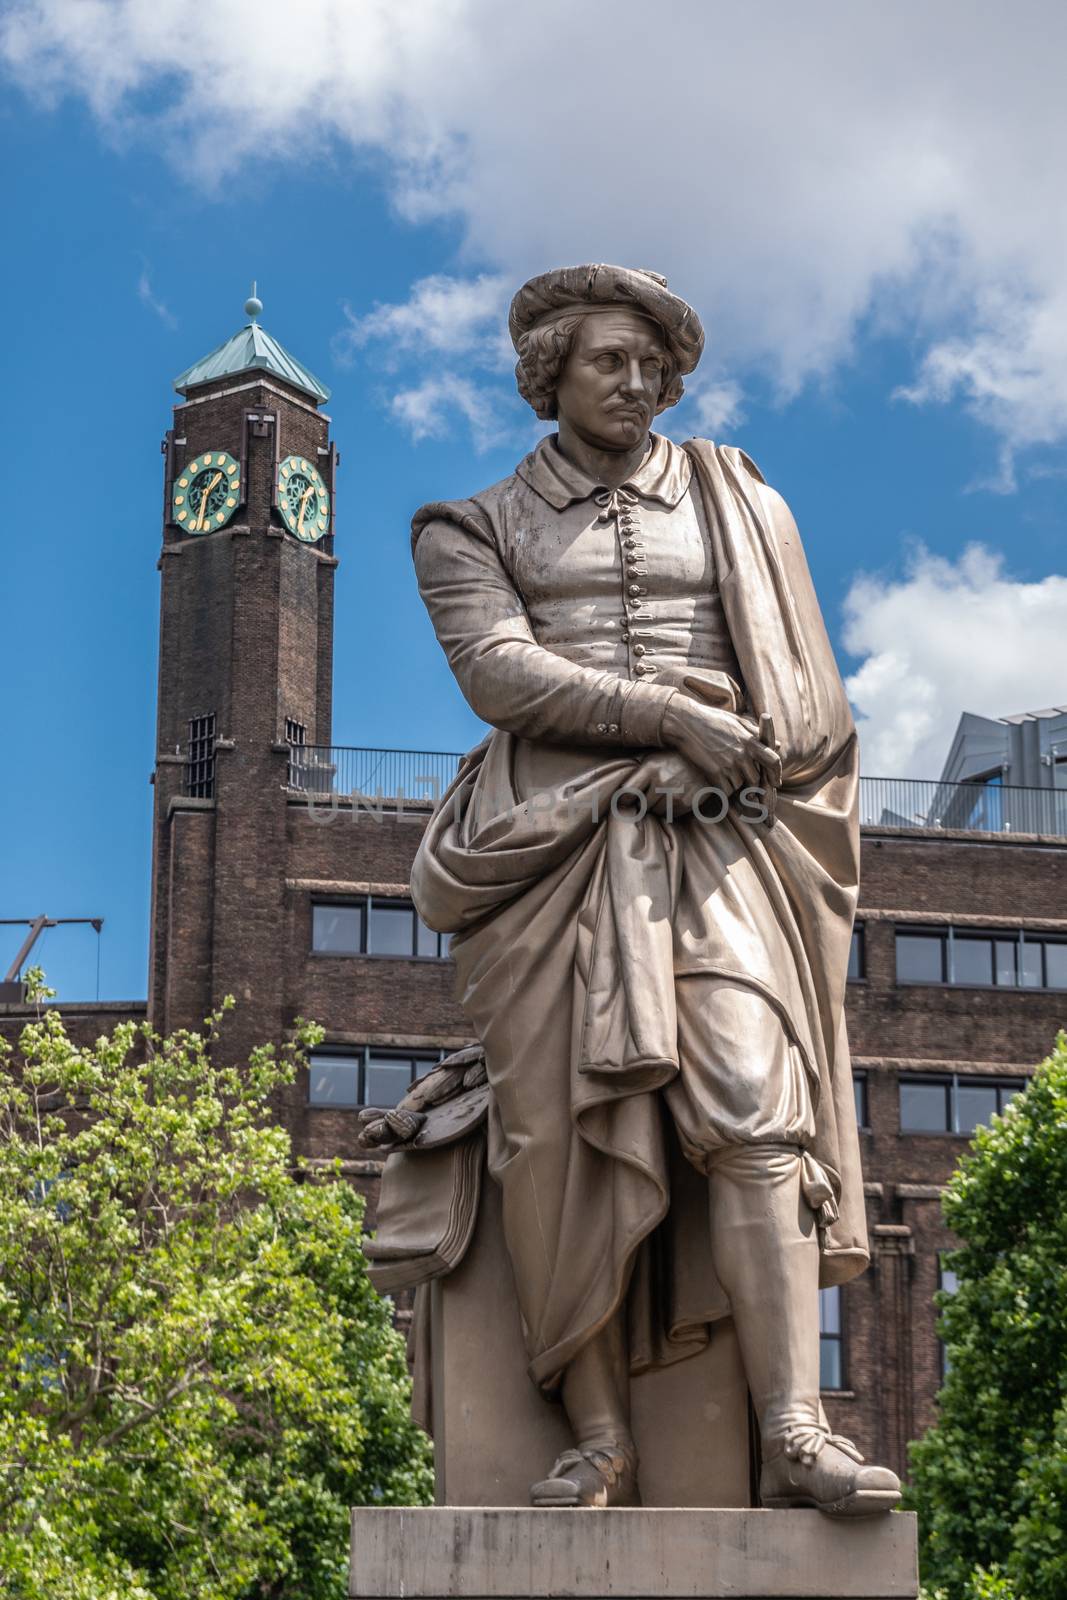 Amsterdam, the Netherlands - July 1, 2019: Beige full body of Rembrandt van Rijn statue on Rembrandtplein under blue sky with white clouds. Clock tower in brown stones in back.